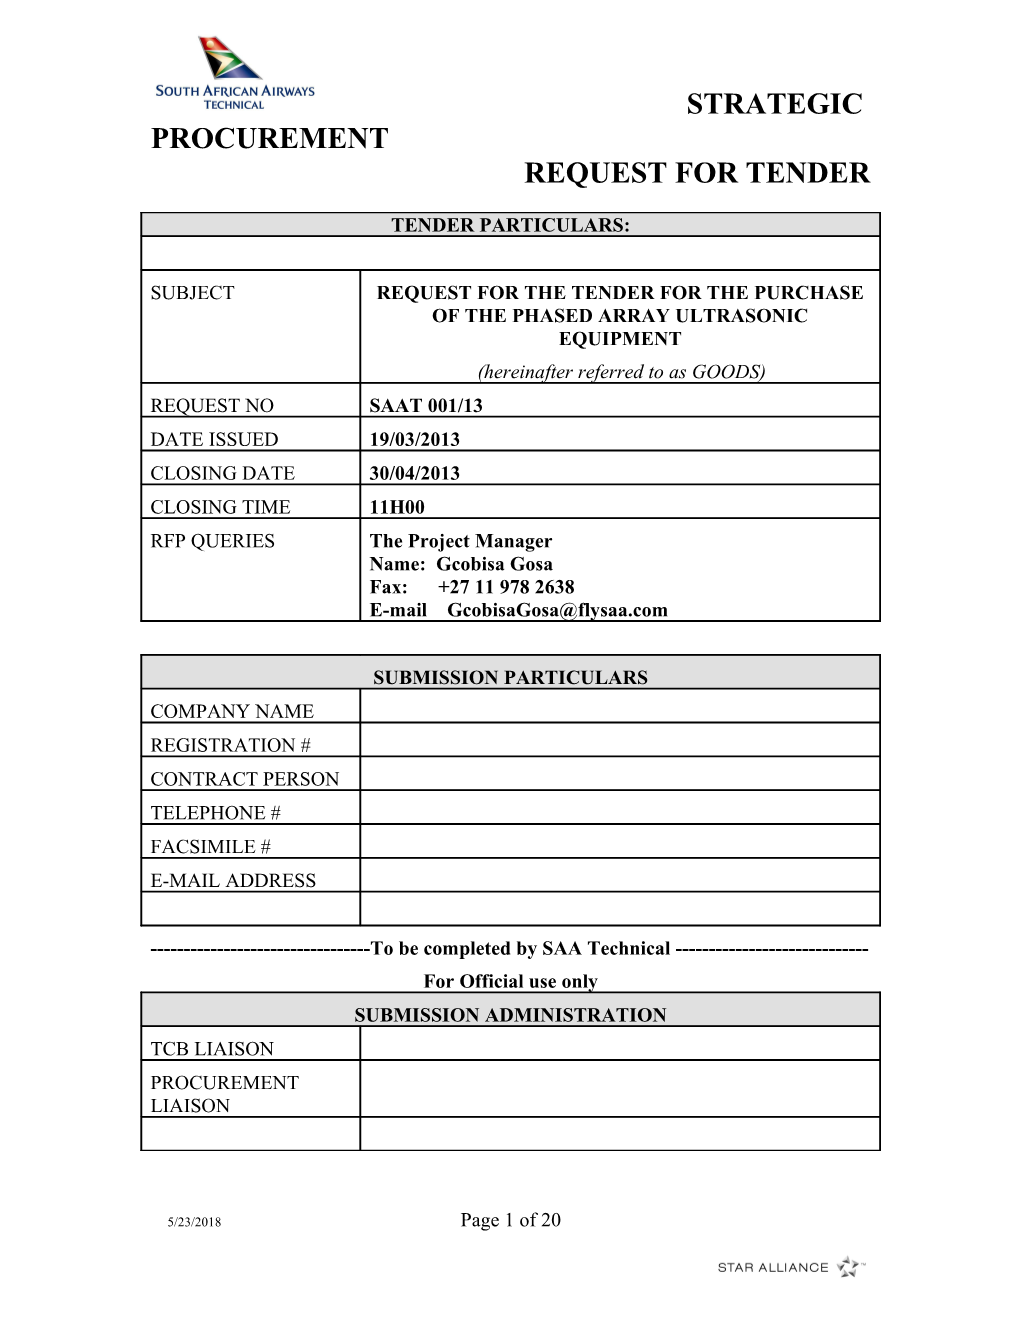 Request for Tender s2